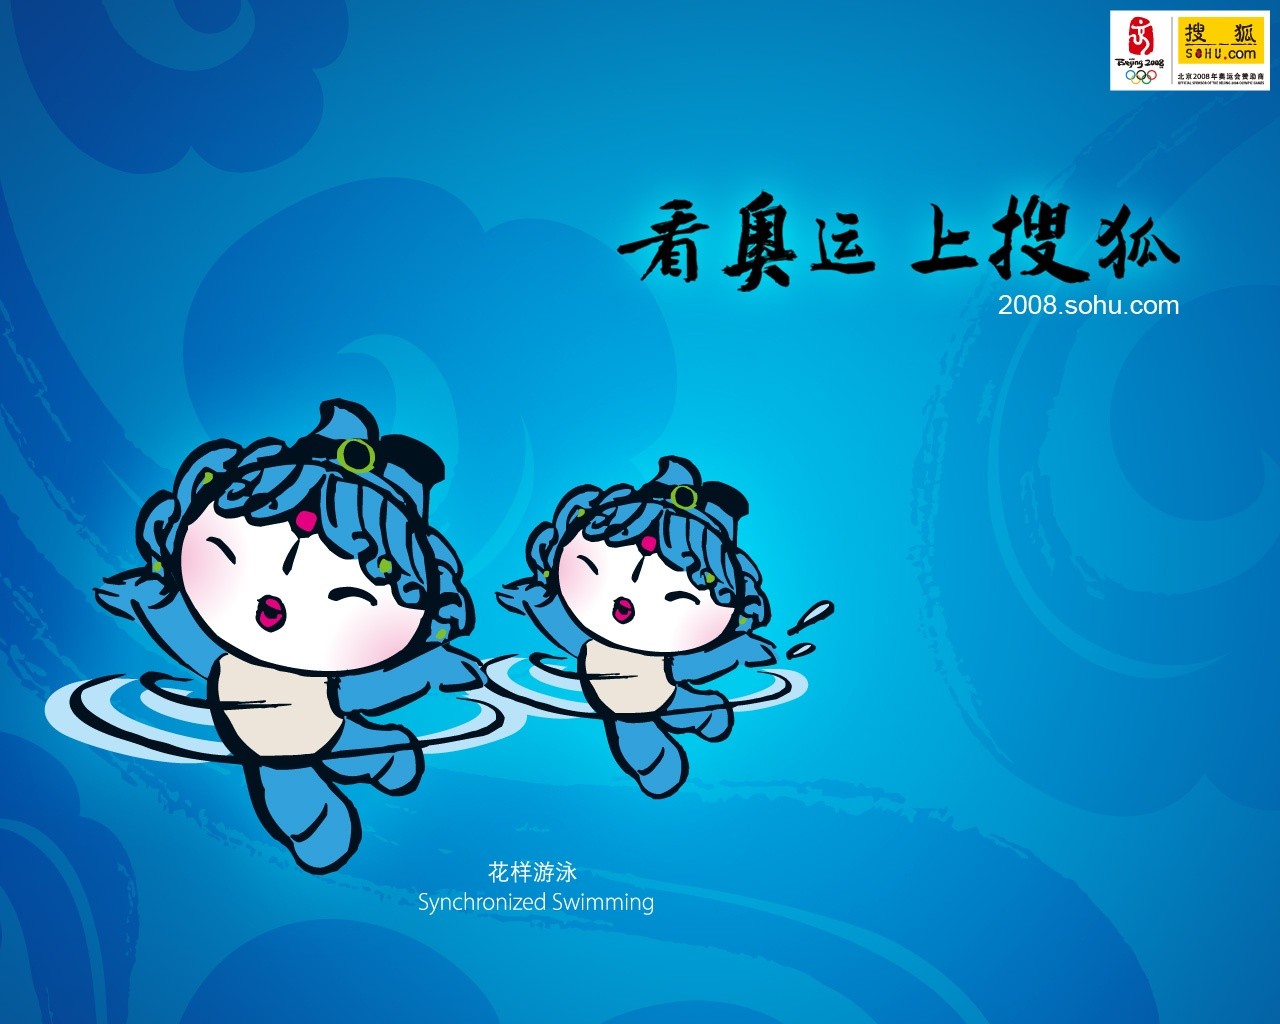 08 Olympic Games Fuwa Wallpapers #7 - 1280x1024